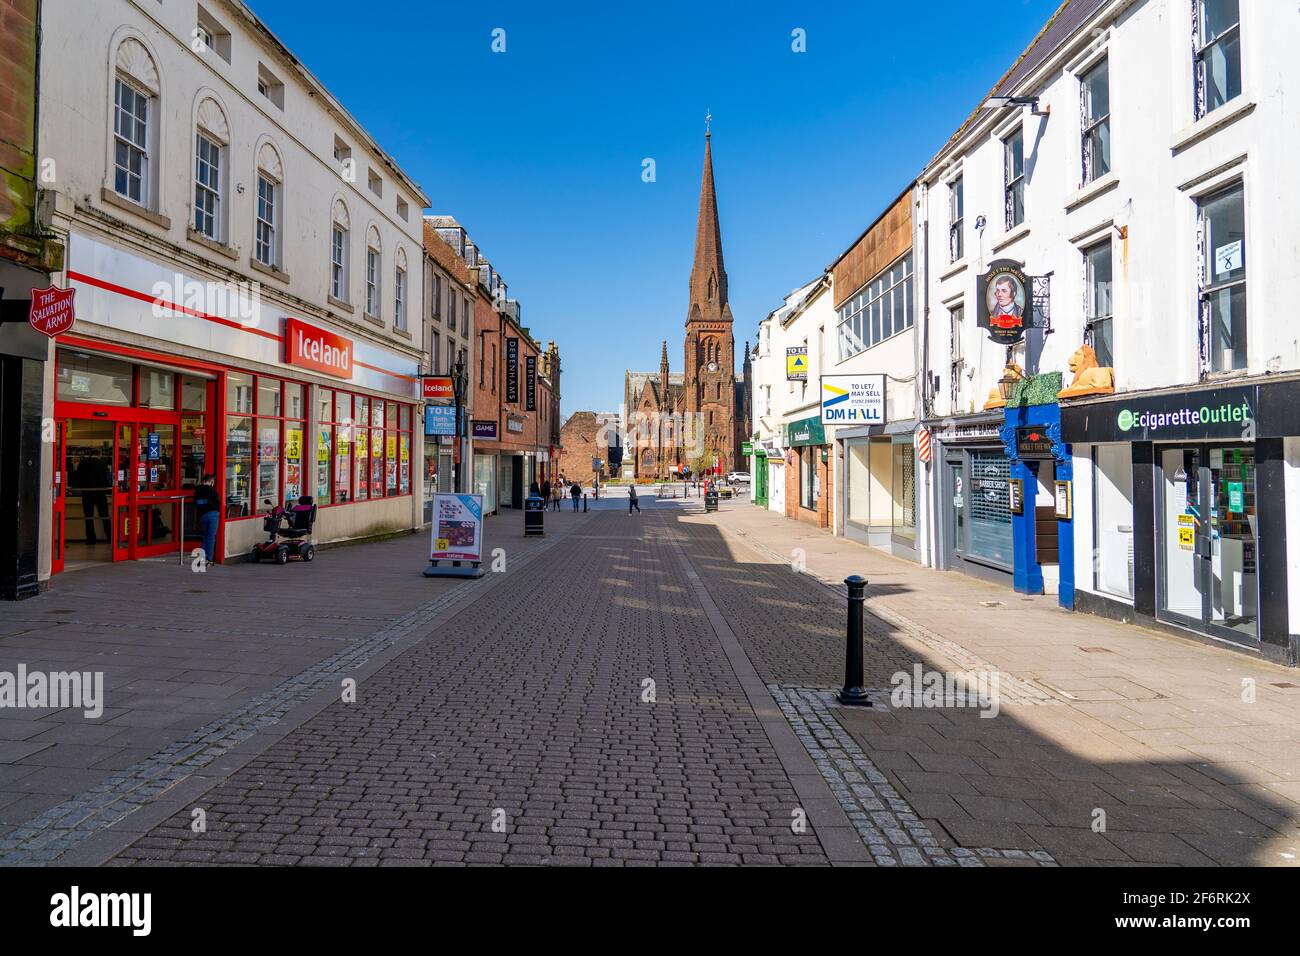 Dumfries, Scotland, UK. 2 April 2021. On the day when Scottish Government relaxes lockdown rules from “Stay at Home” to “Stay Local” the shopping streets of Dumfries town centre remain almost deserted with virtually no shops or businesses trading. Pic;  High Street is very quiet despite the sunny spring weather. Iain Masterton/Alamy Live News Stock Photo